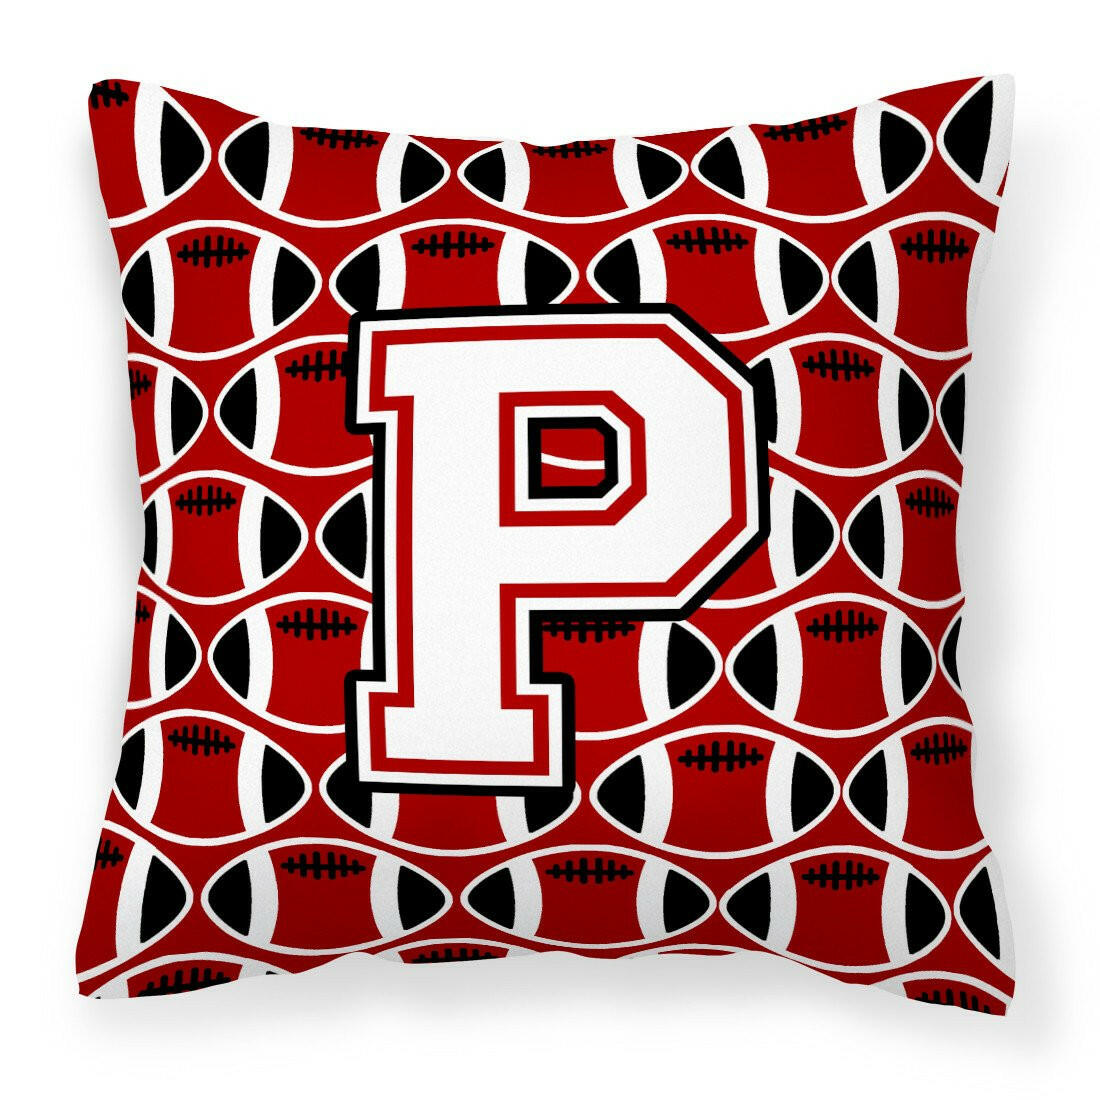 Letter P Football Cardinal and White Fabric Decorative Pillow CJ1082-PPW1414 by Caroline's Treasures